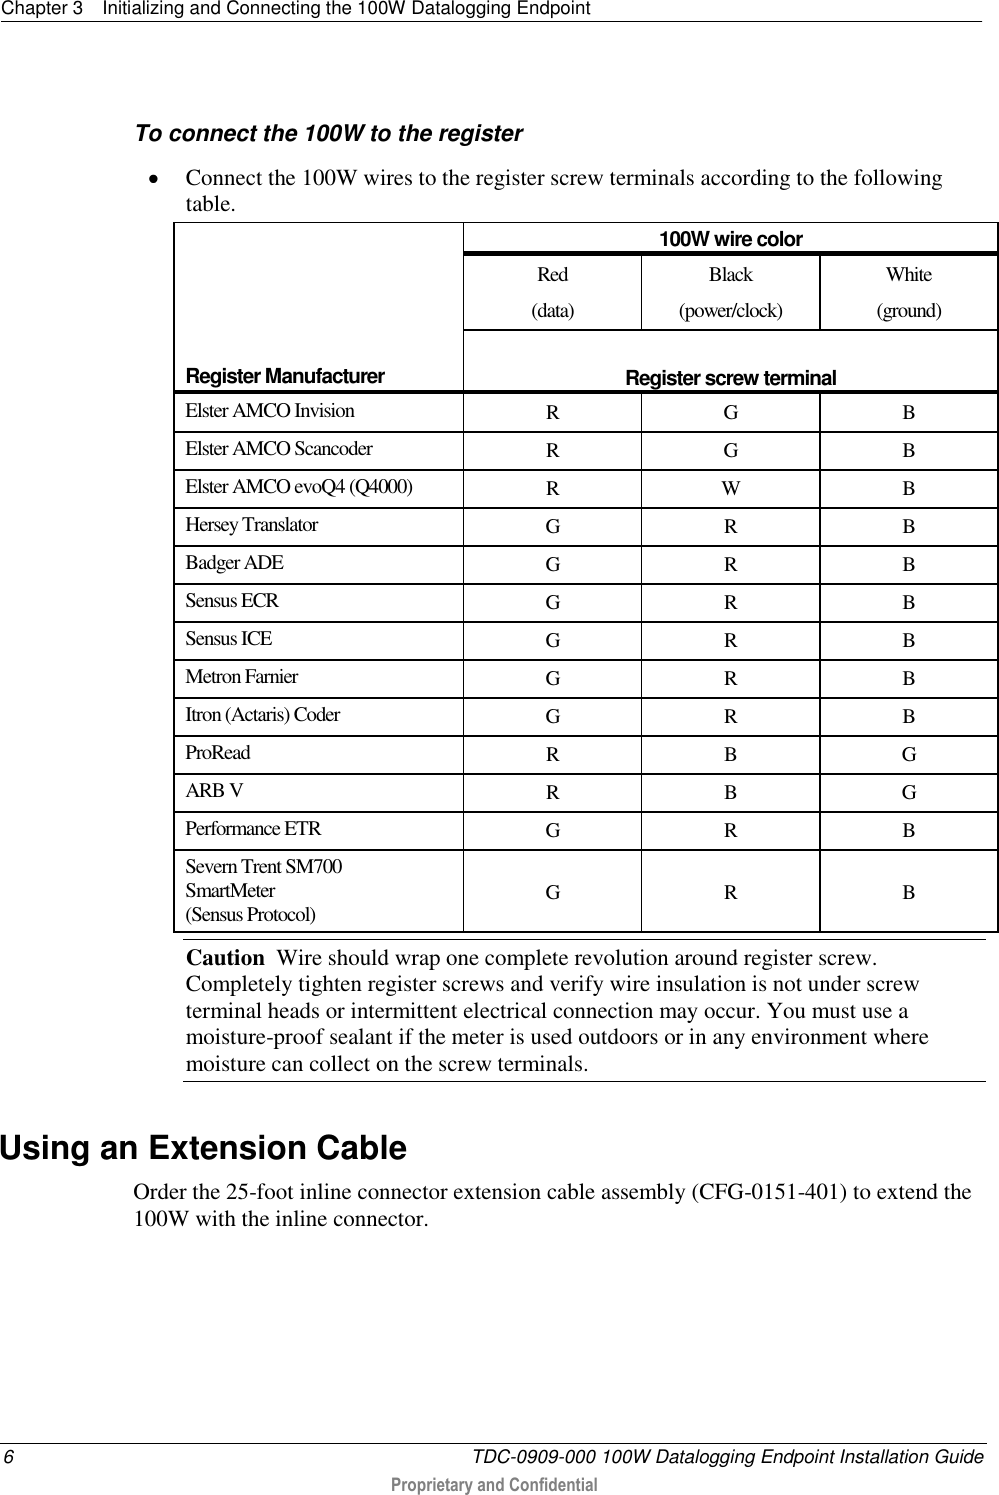 Chapter 3  Initializing and Connecting the 100W Datalogging Endpoint  6  TDC-0909-000 100W Datalogging Endpoint Installation Guide  Proprietary and Confidential    To connect the 100W to the register  Connect the 100W wires to the register screw terminals according to the following table.      Register Manufacturer 100W wire color Red  (data) Black  (power/clock) White  (ground)  Register screw terminal Elster AMCO Invision R G  B Elster AMCO Scancoder R G  B Elster AMCO evoQ4 (Q4000) R W B Hersey Translator G R B Badger ADE G R B Sensus ECR G R B Sensus ICE G R B Metron Farnier G R B Itron (Actaris) Coder G R B ProRead R B G ARB V R B G Performance ETR G R B Severn Trent SM700 SmartMeter (Sensus Protocol)  G  R  B Caution  Wire should wrap one complete revolution around register screw. Completely tighten register screws and verify wire insulation is not under screw terminal heads or intermittent electrical connection may occur. You must use a moisture-proof sealant if the meter is used outdoors or in any environment where moisture can collect on the screw terminals.   Using an Extension Cable Order the 25-foot inline connector extension cable assembly (CFG-0151-401) to extend the 100W with the inline connector.      